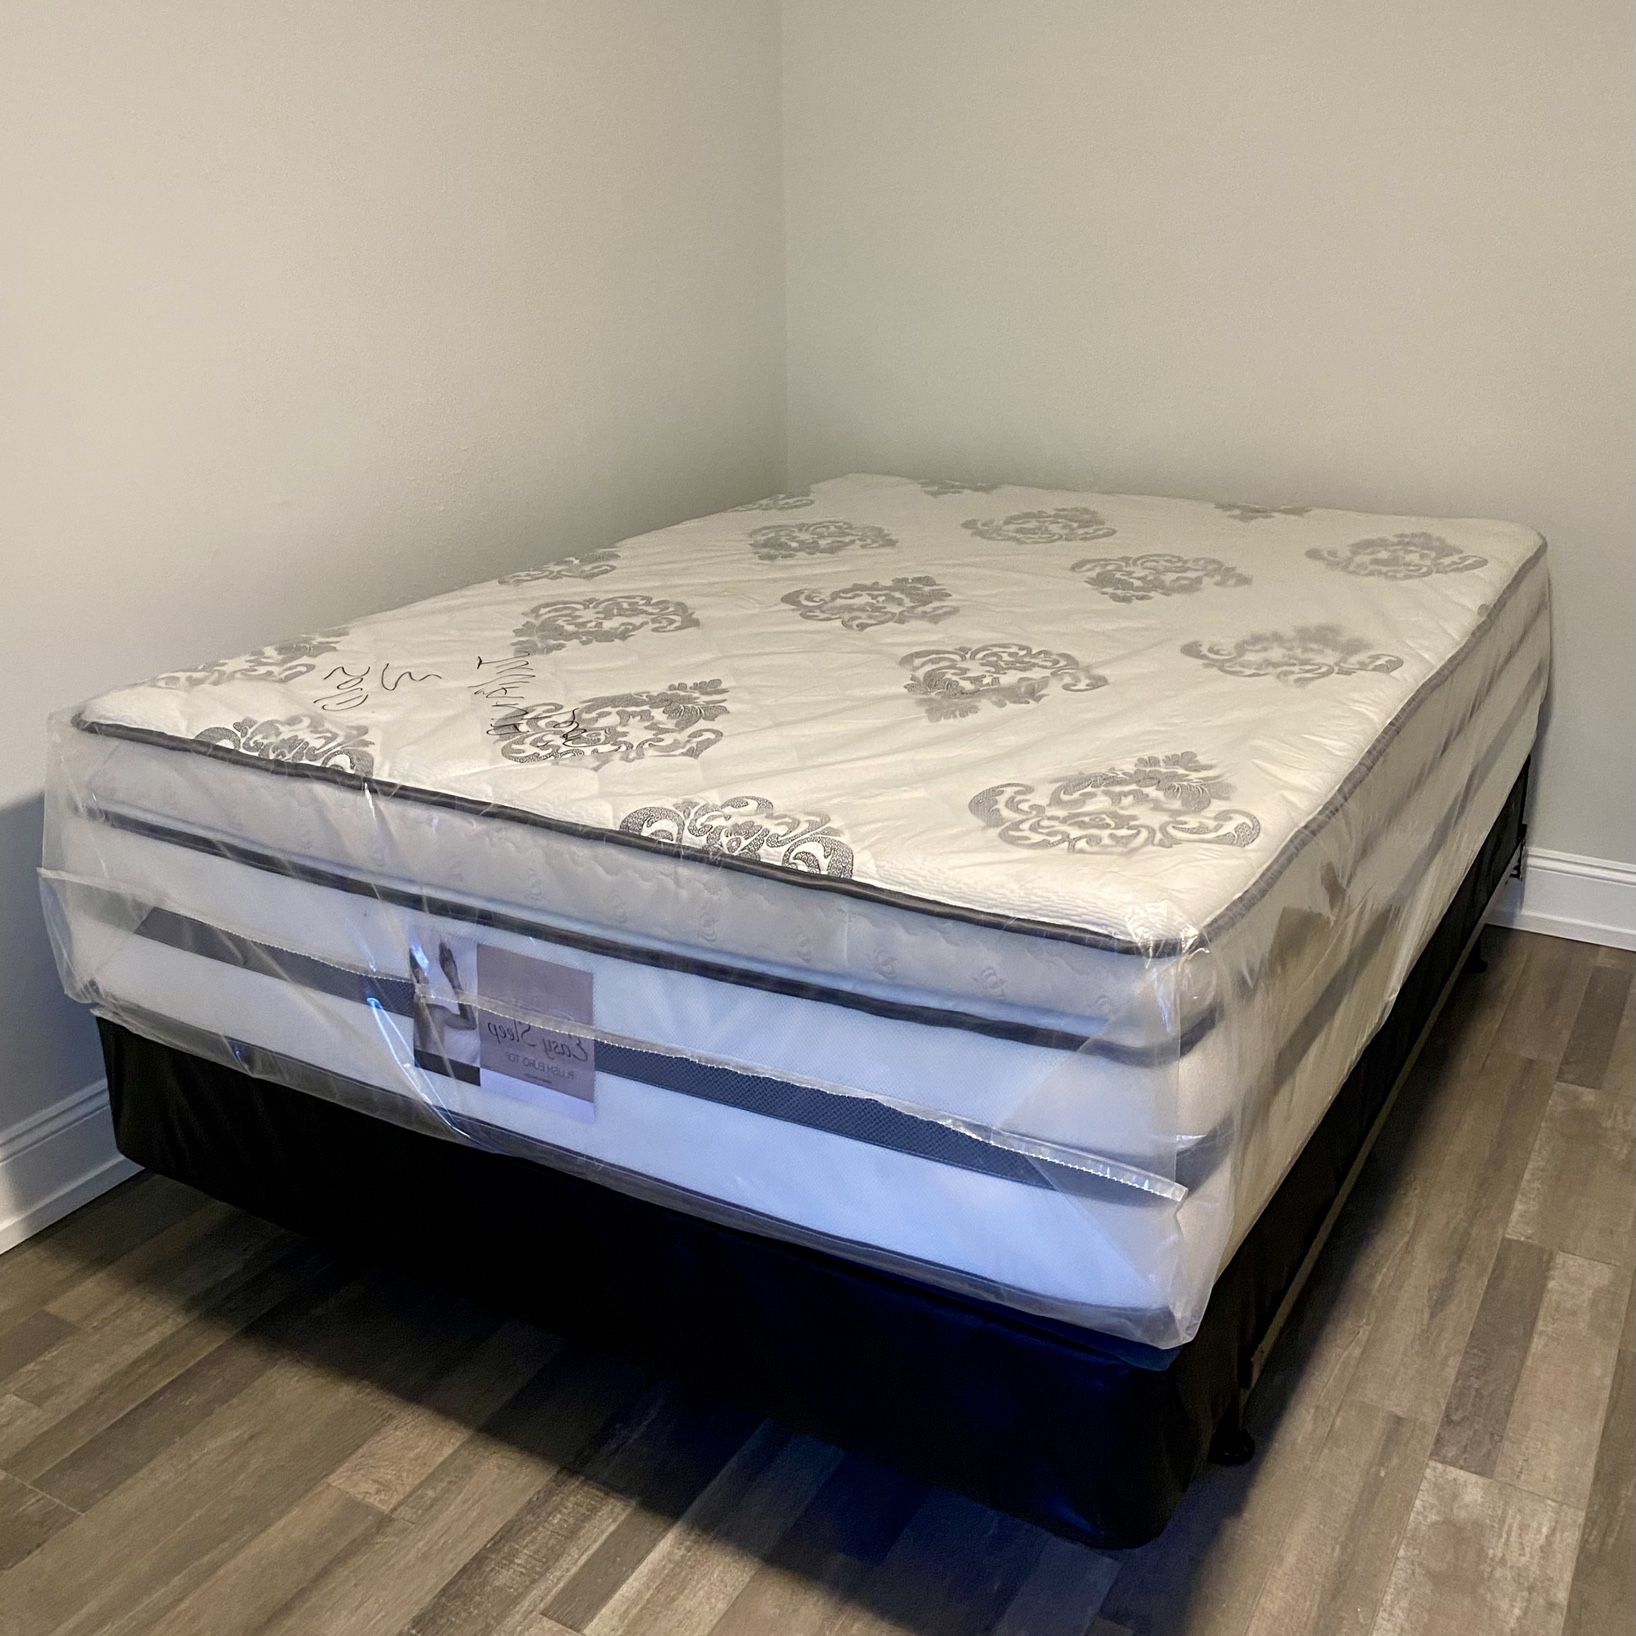 Full Size Mattress 14 Inch Thick With Pillow Top Of Gran Comfort And Box Springs New From Factory Available All Sizes Same Day Delivery